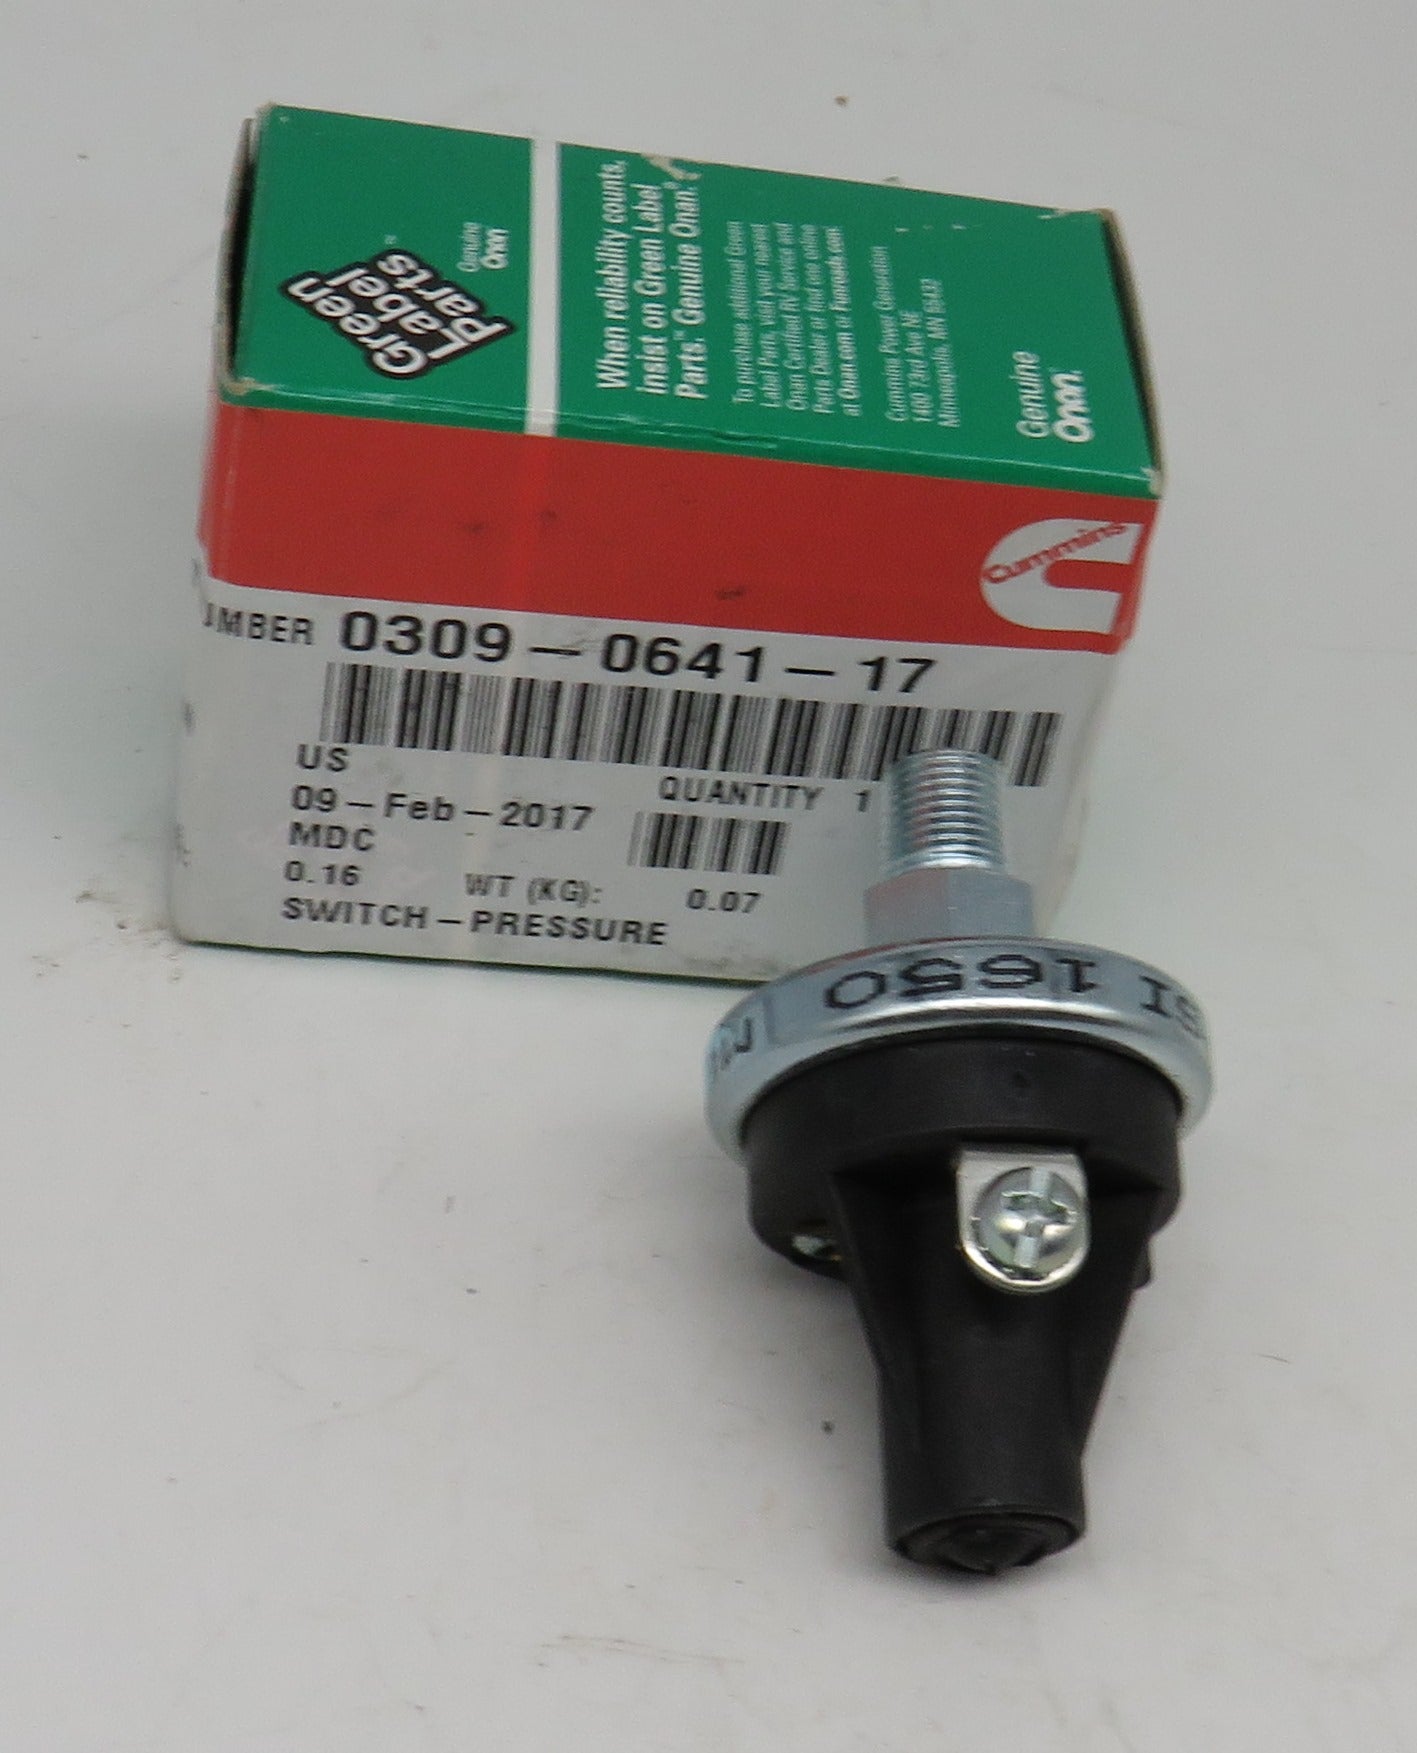 309-0641-17 Onan Low Oil Pressure Switch Rated at 5 Psi (Replaces 309-0104)  For MDL3, MDL4, MDL6 (Spec A) 